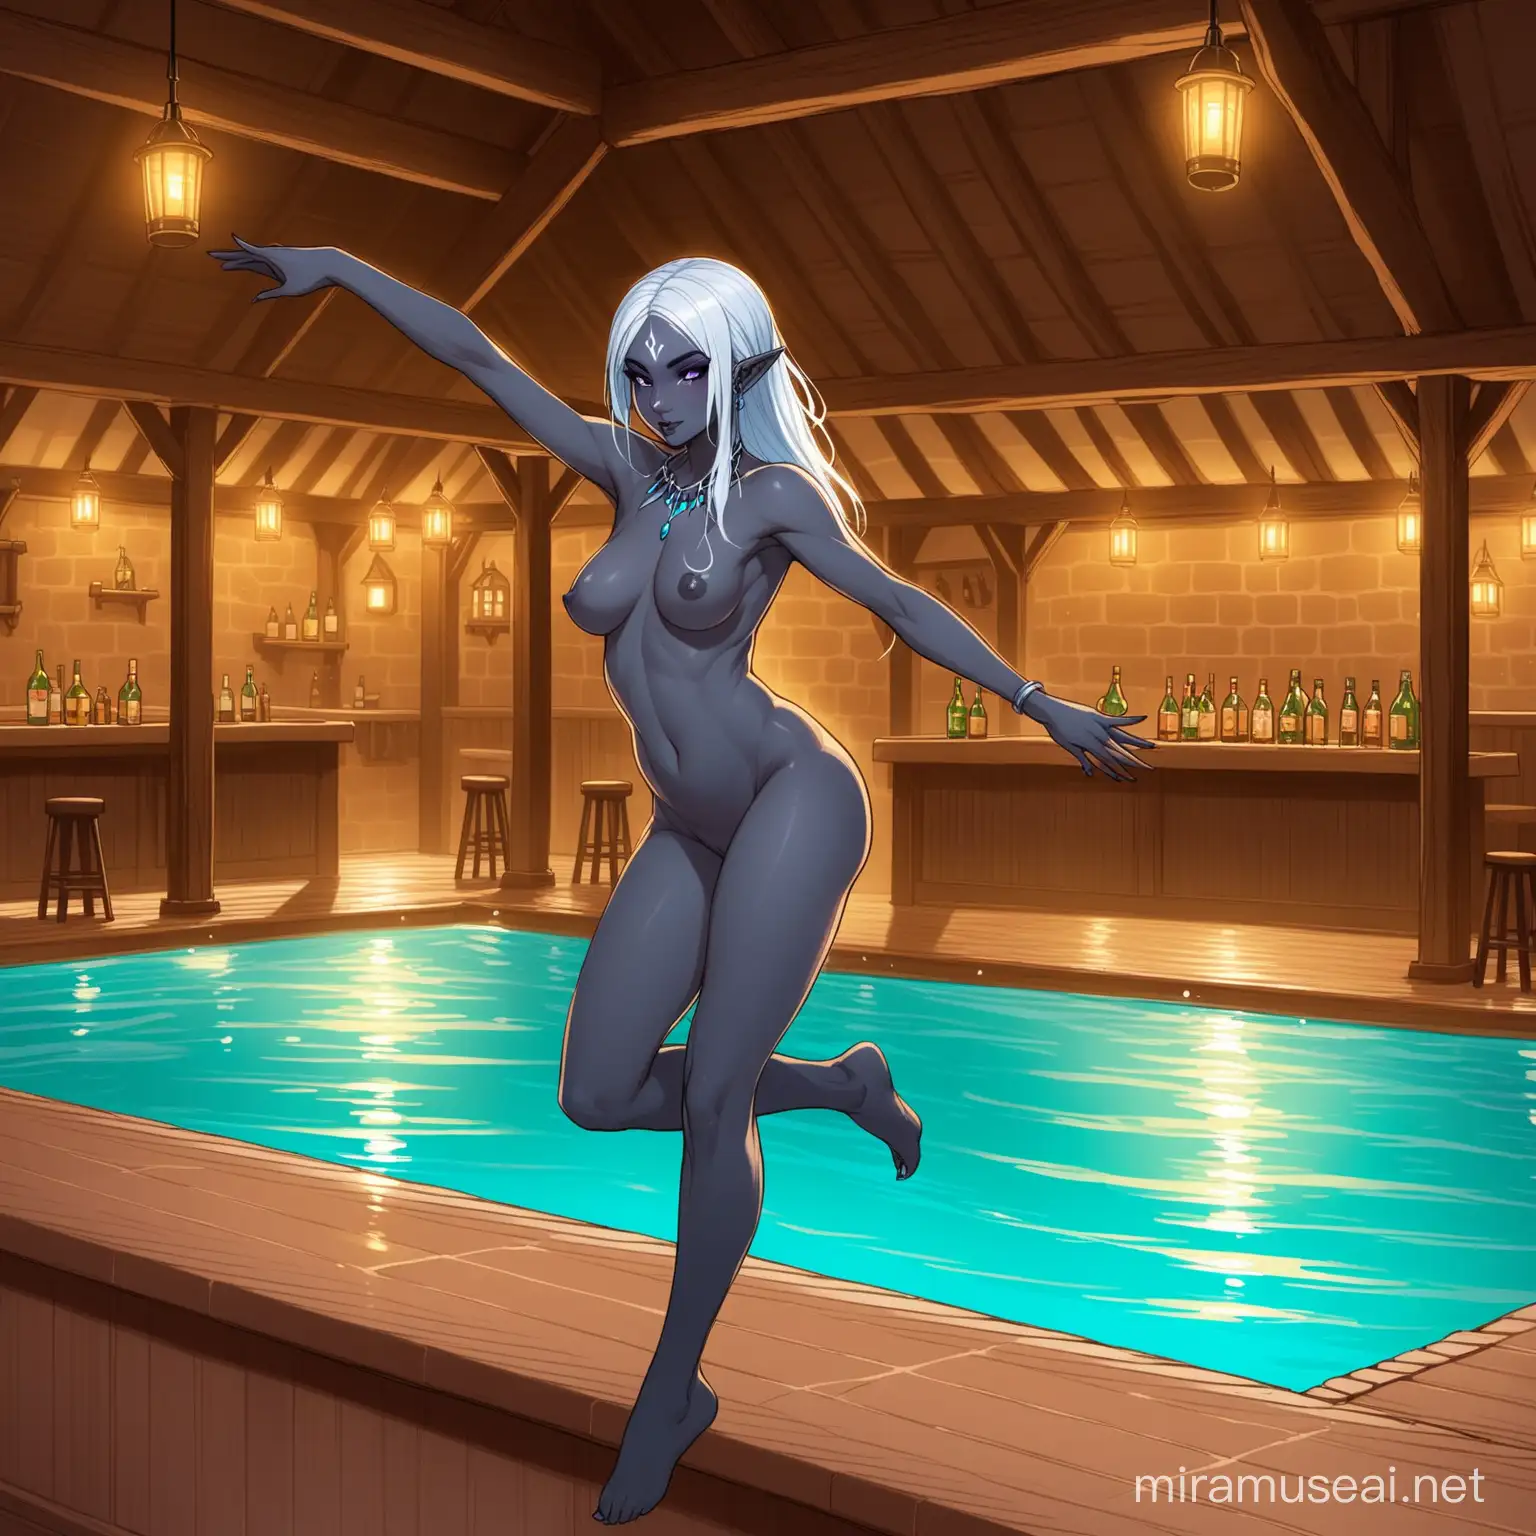 naked female a Drow, dancing around a pool in a tavern spa. 

